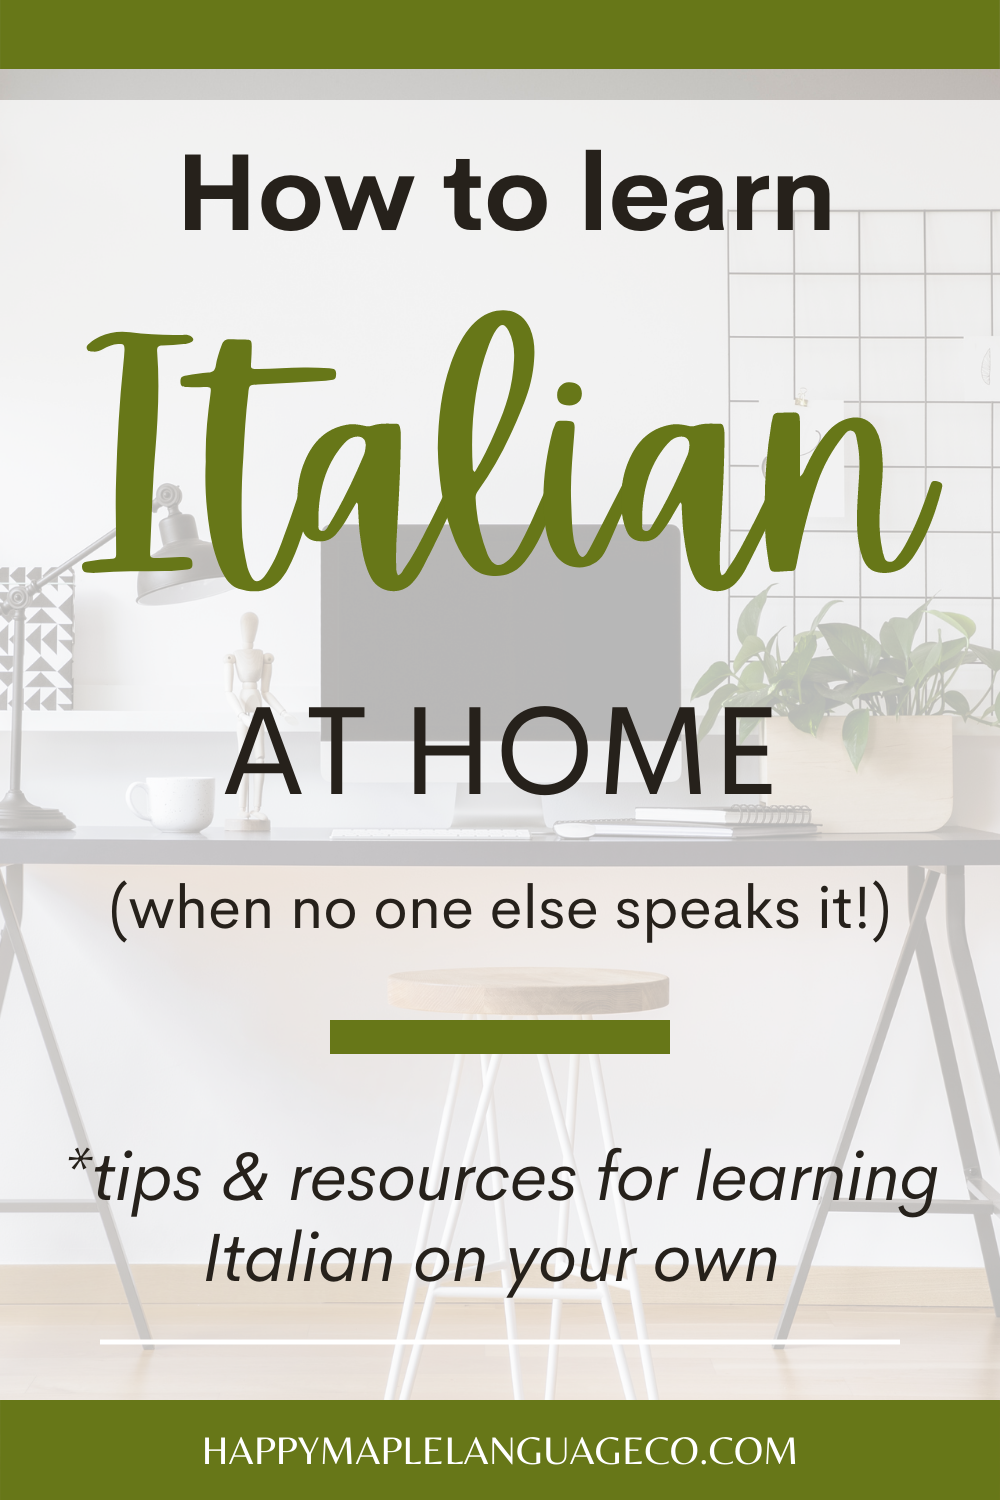 How to learn Italian at home when no one else speaks it